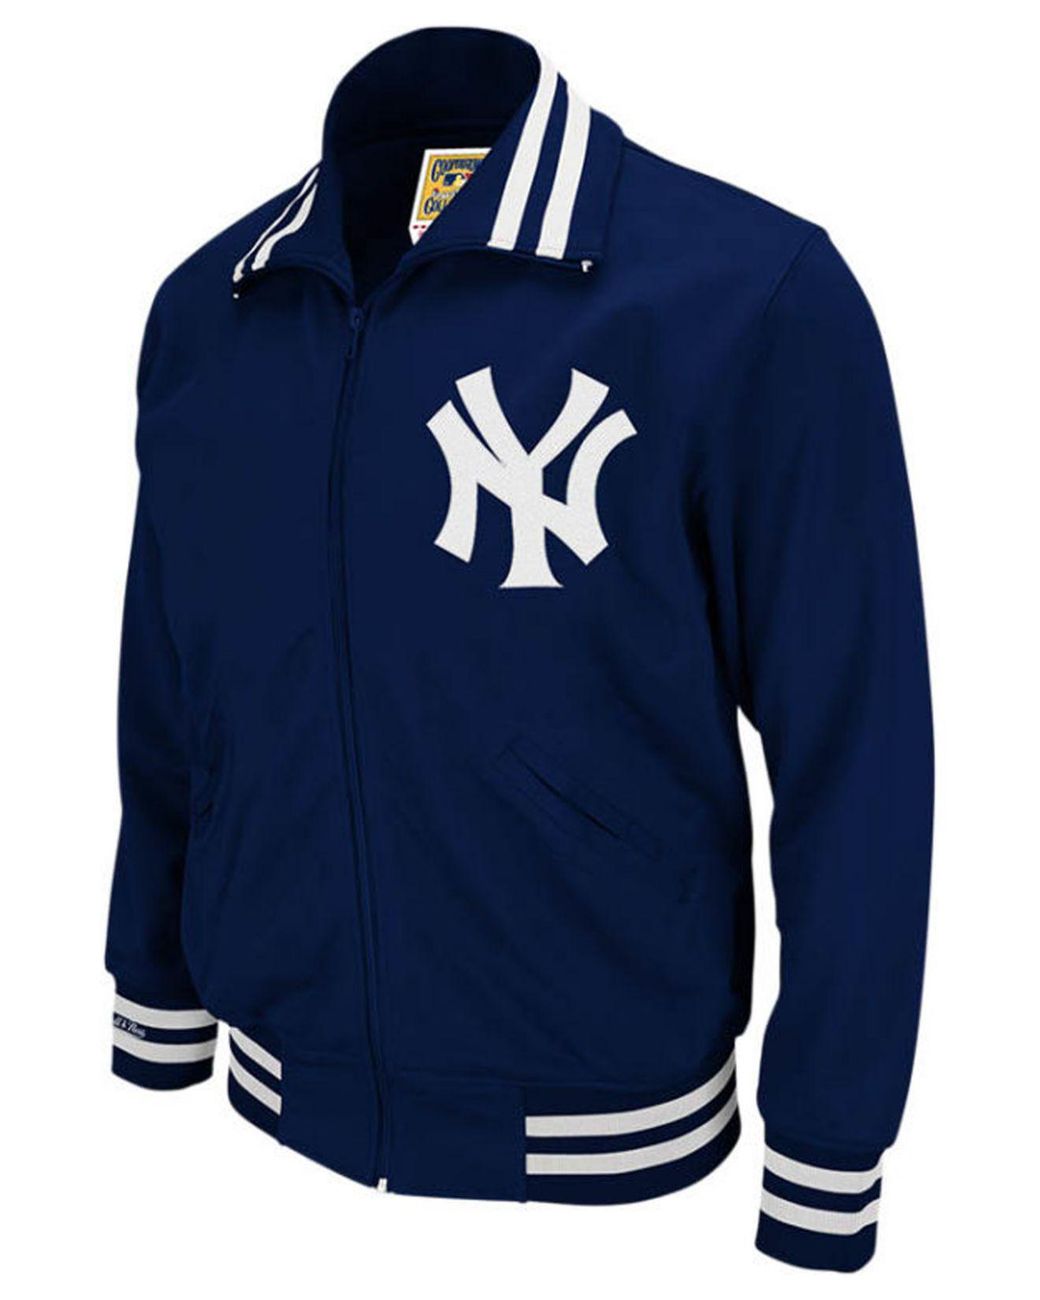 Mitchell & Ness Mens 1988 Yankees Authentic BP Jacket Blue